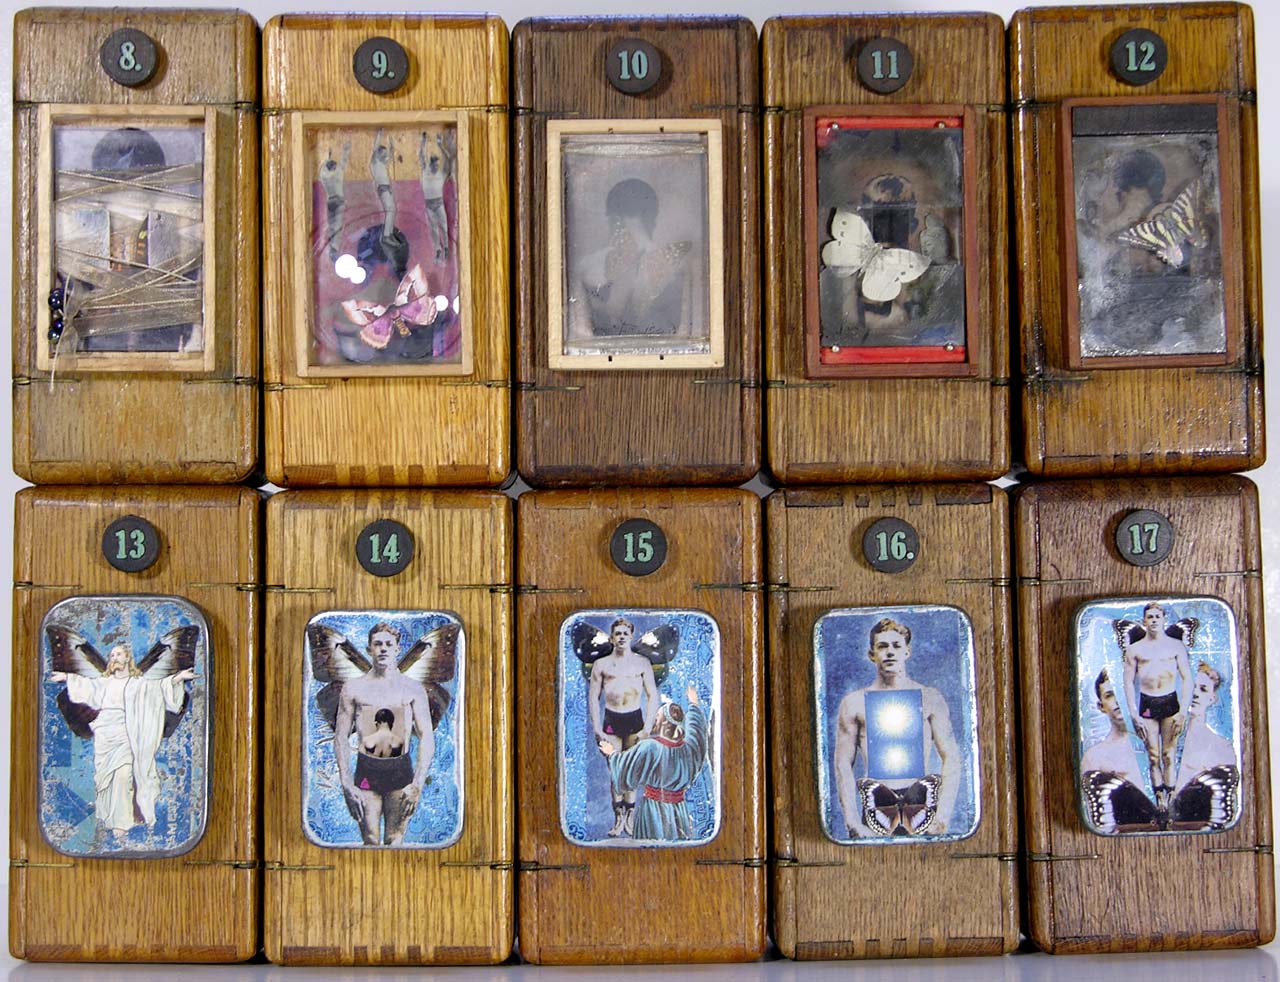     \"The Metamorphosis of Faith (exteriors)\"
    6.5\" x 3.5\" x 3.5\" (each box when closed)
    2005
    The fronts of 10 pieces from the series The Metamorphosis of Faith.